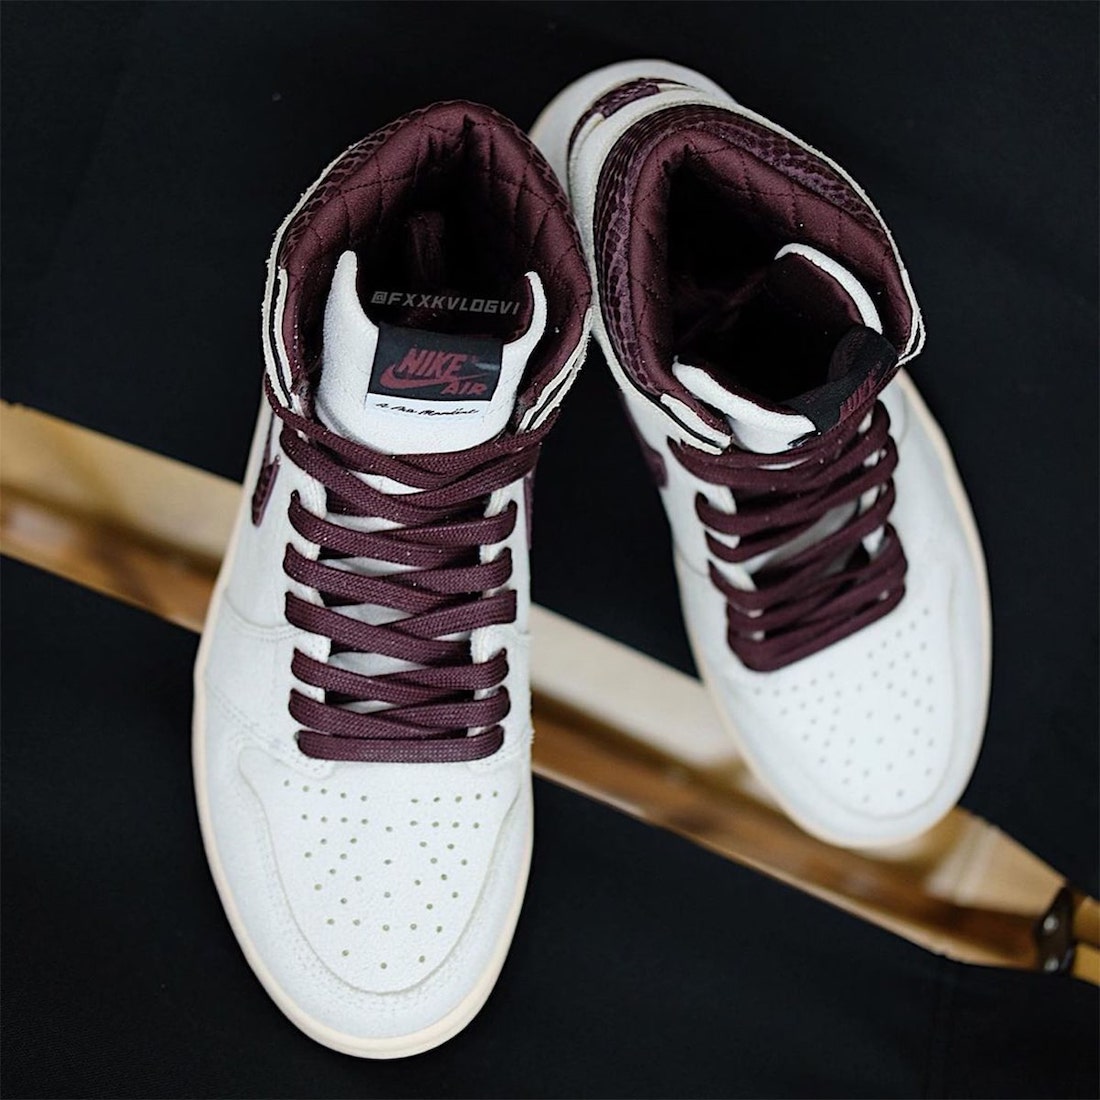 lebron james shoes for 45 dollars running shoes similar to nike free Release Date